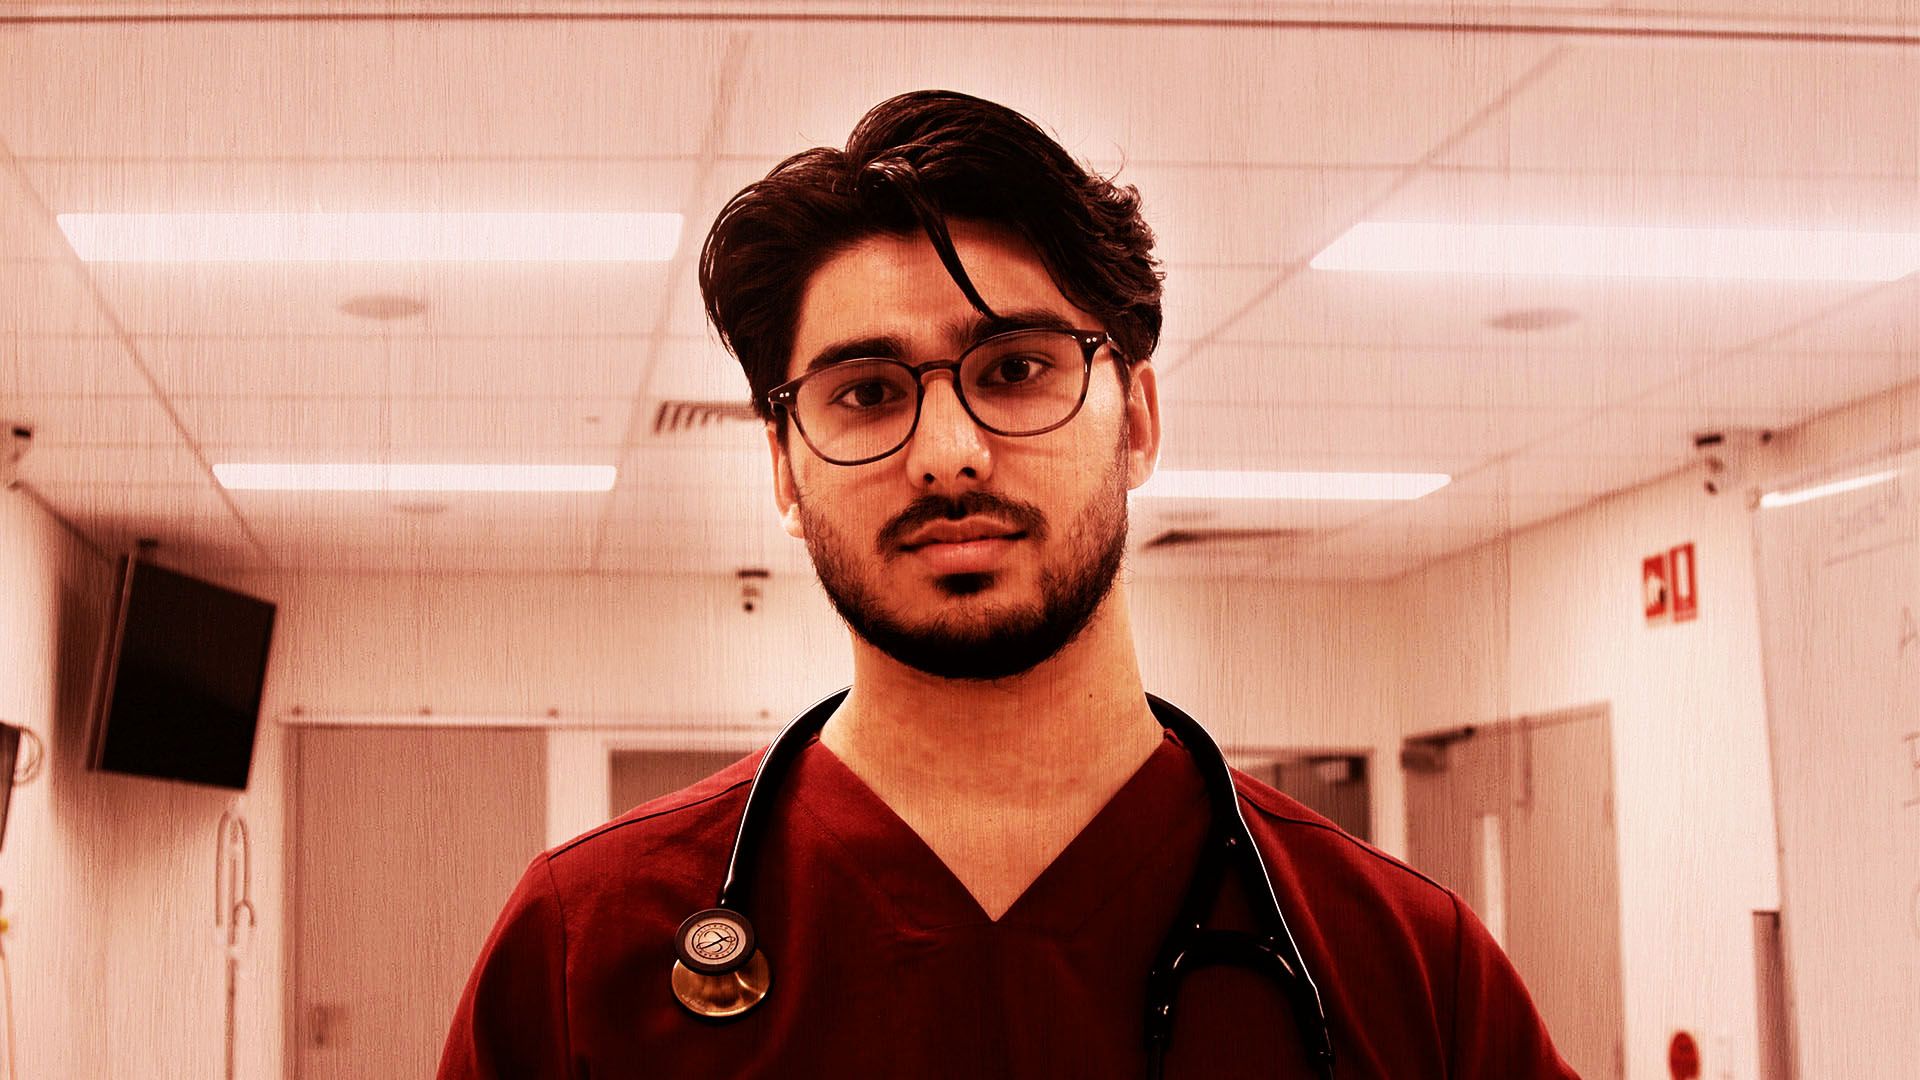 Summer Season: An aspiring doctor from the 'burbs takes on medical schools for elitism